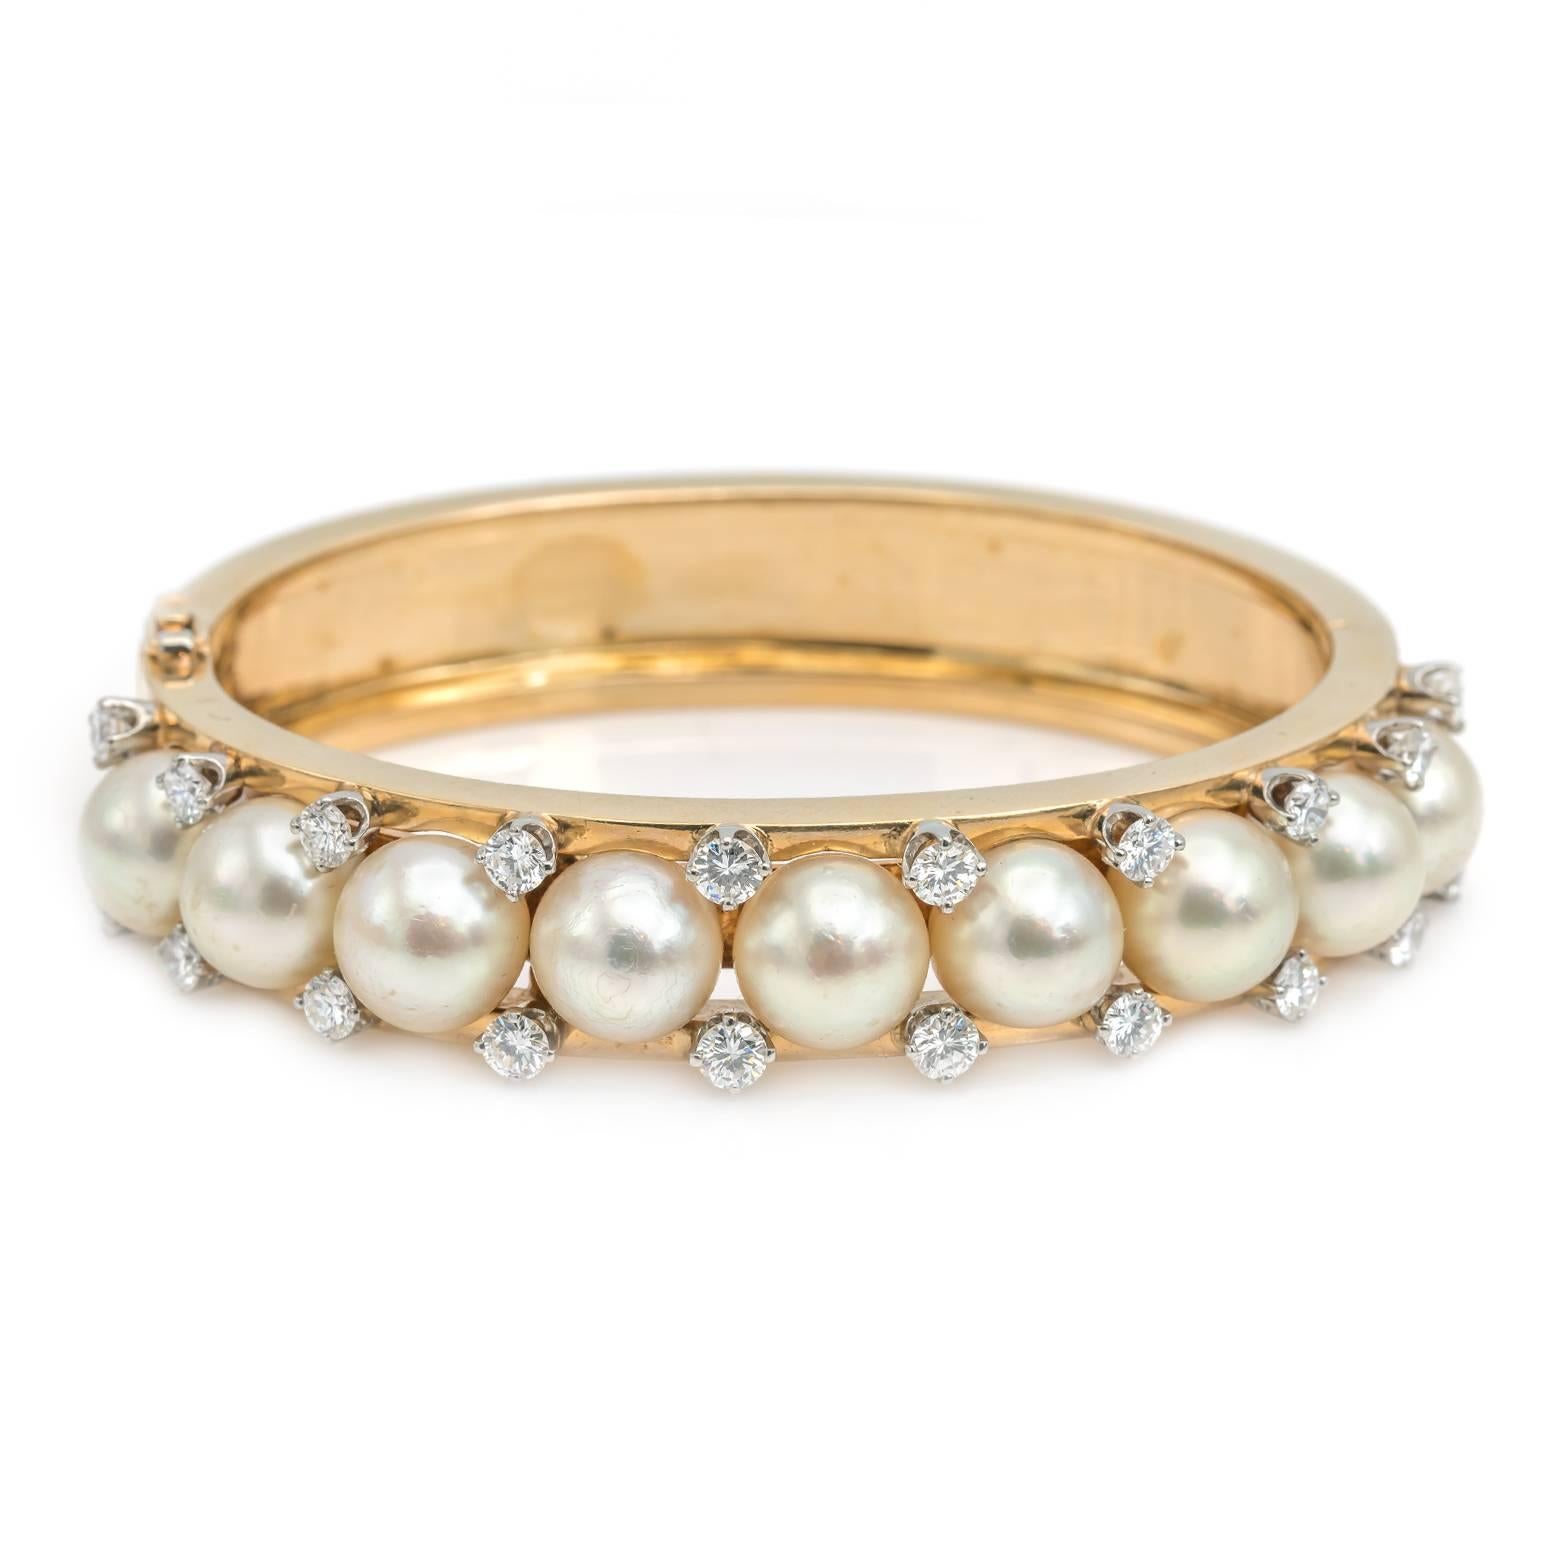 This stunning bracelet is beautiful showcasing a multitude of salt water pearls and twenty diamonds. The diamonds are VS/VS2 G/H set in 14k yellow gold and is very substantial. 

